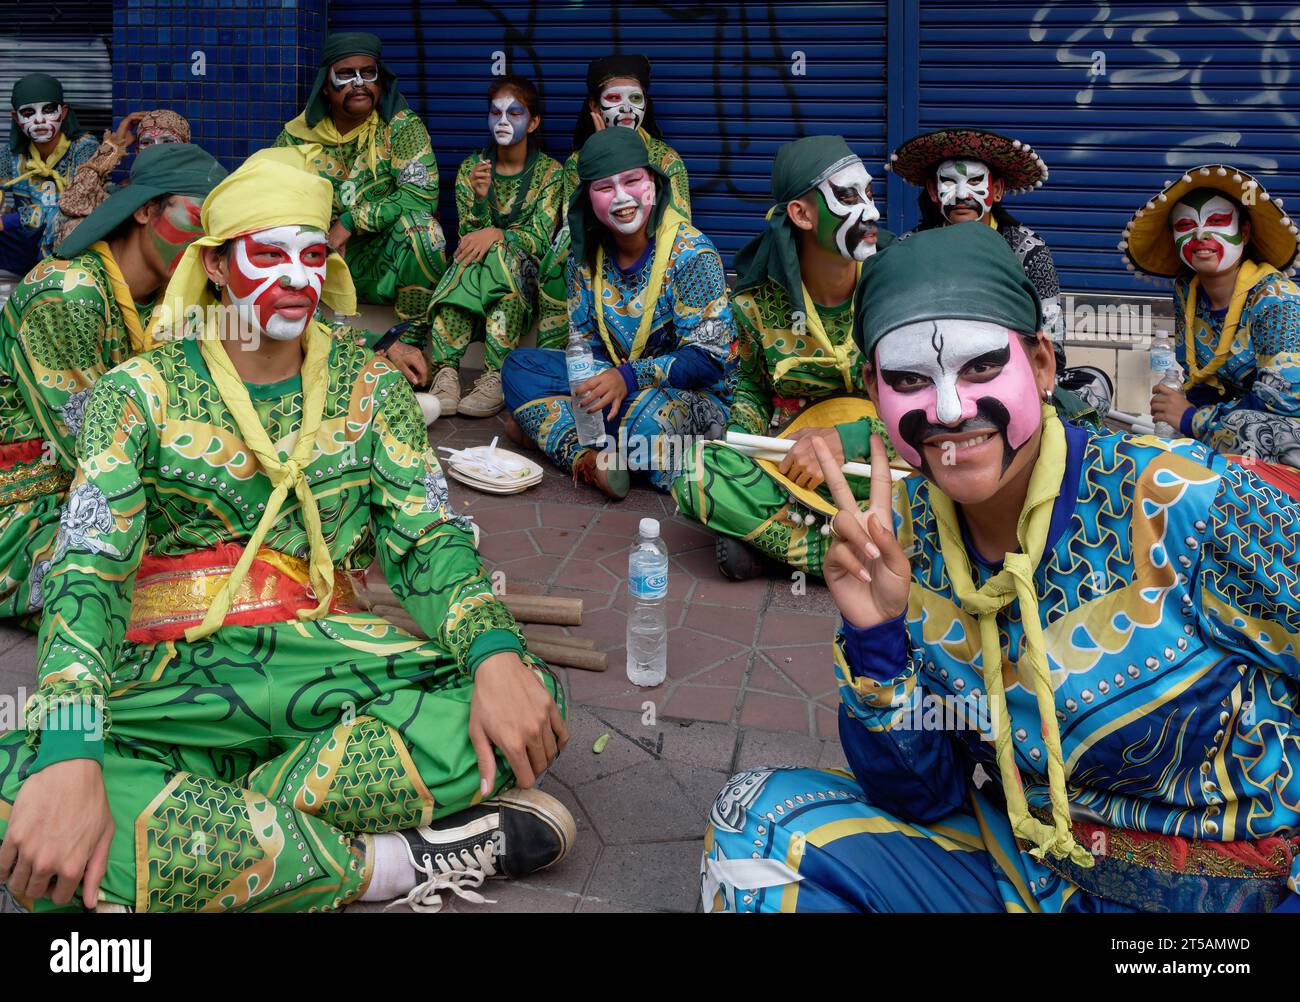 Members of a Lion Dance troupe with exotic dress and colorfully painted faces waiting for their performance at a Taoist shrine in Bangkok, Thailand Stock Photo